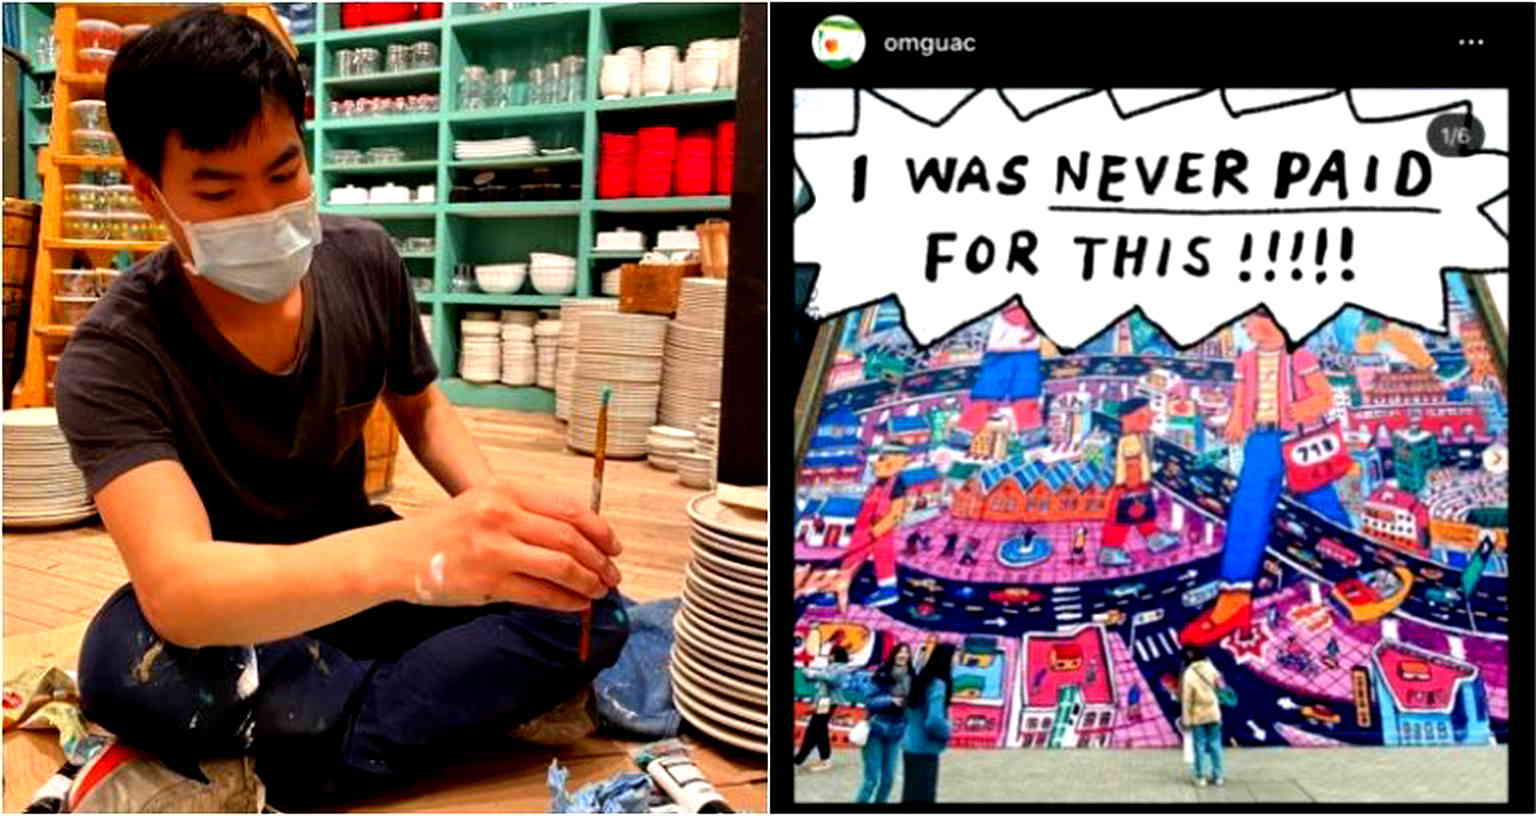 Artist Pushes Company on IG to Pay Him $6K for His Work After Waiting a Year